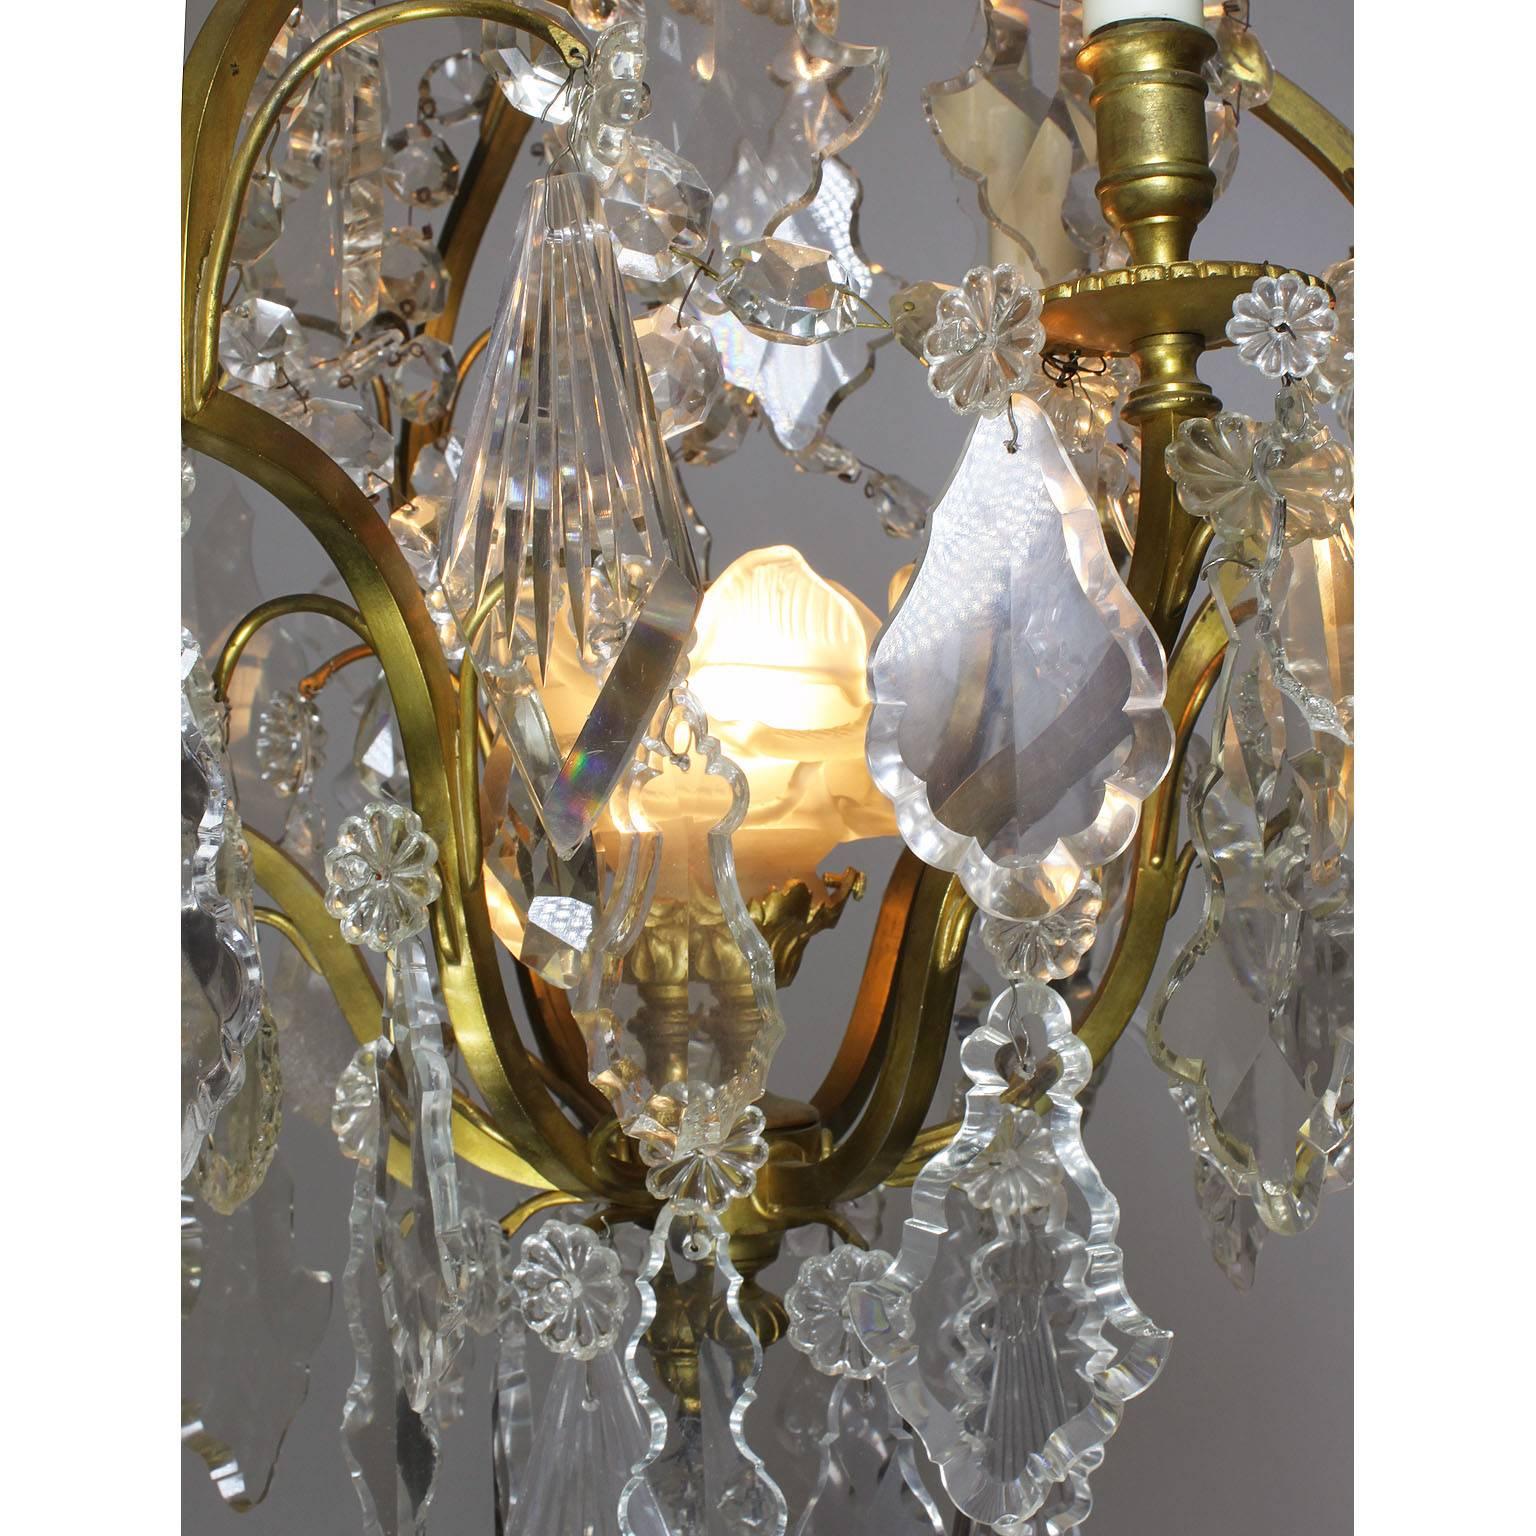 French Early 20th Century Louis XV Style Gilt-Bronze and Cut-Glass Chandelier For Sale 1